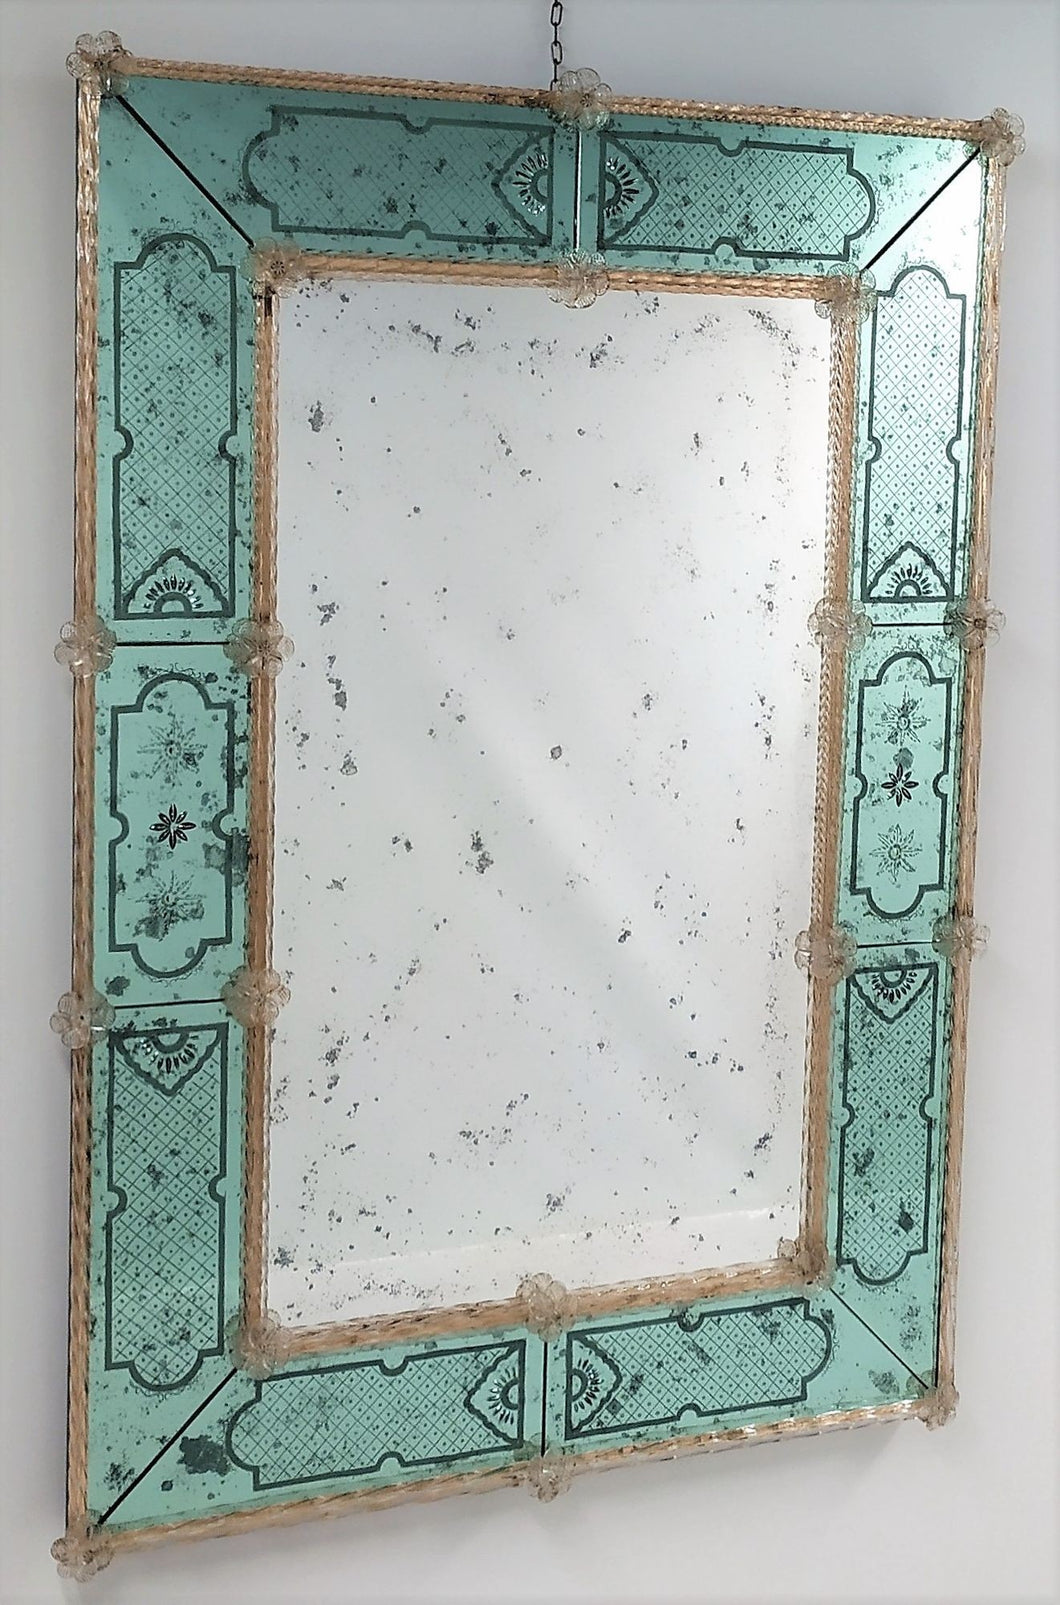 Lovely Etched Venetian Mirror